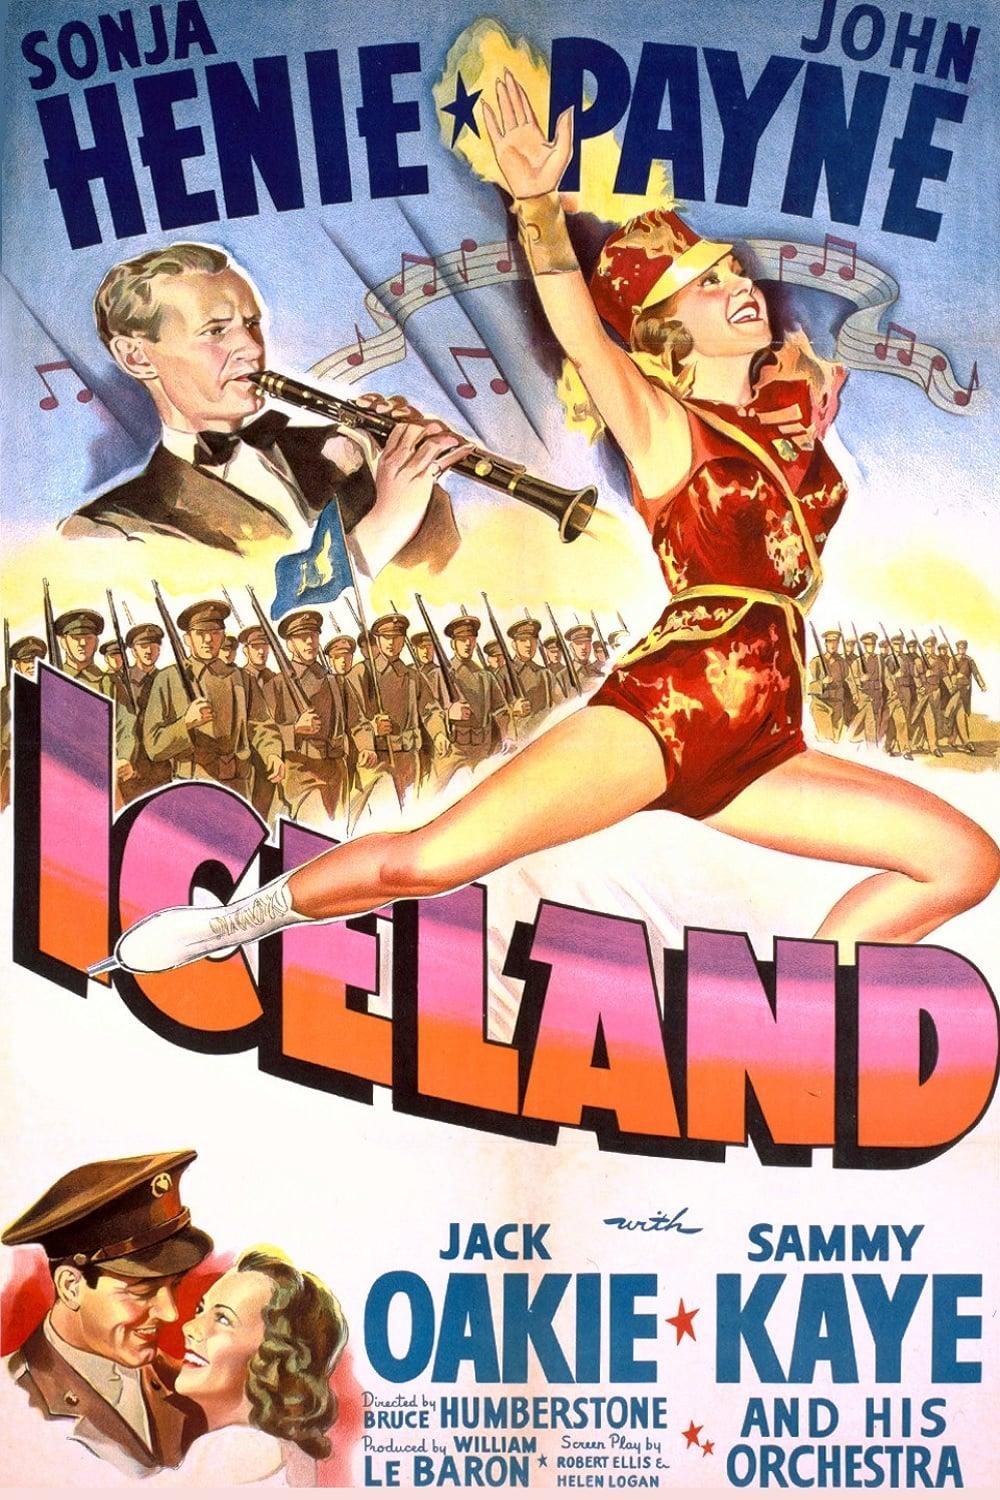 Iceland poster